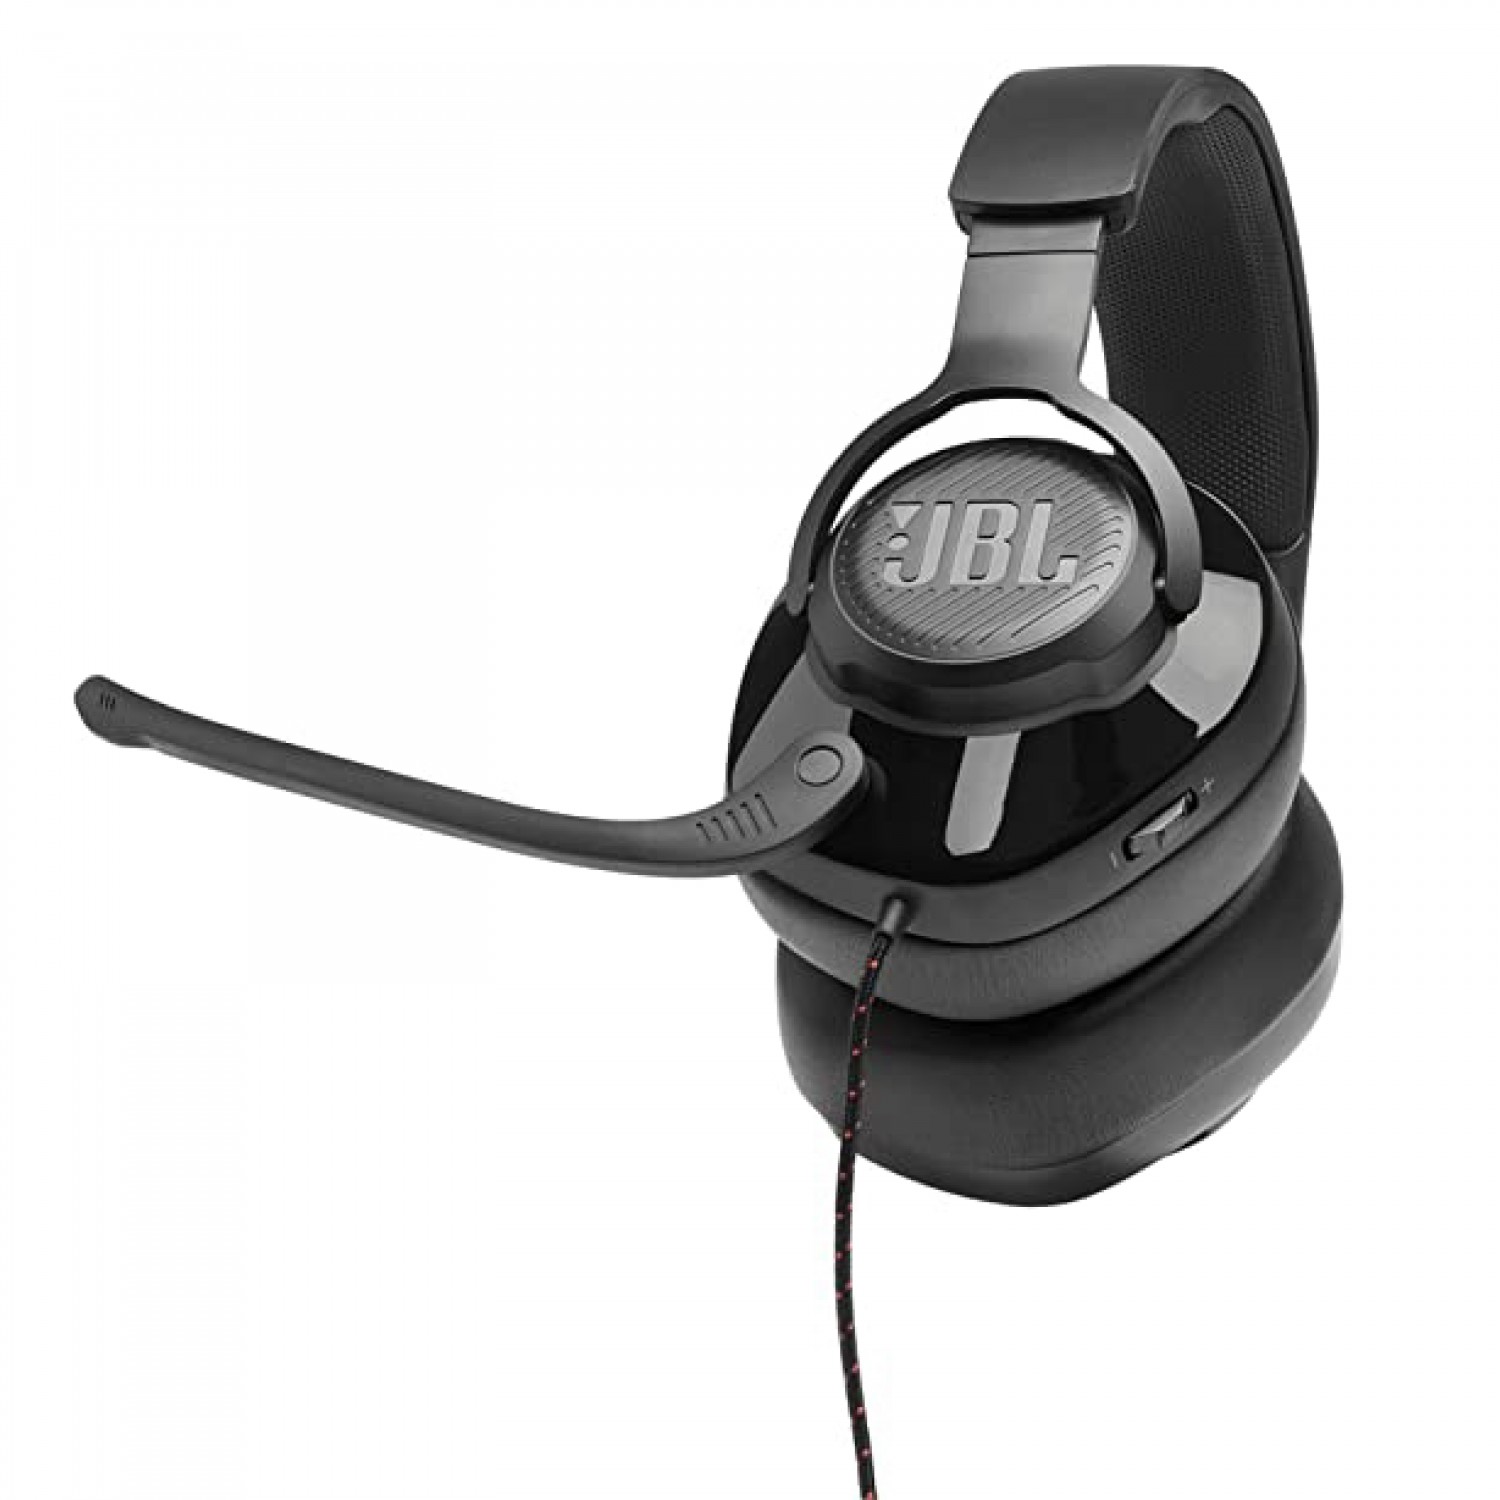 JBL Quantum 100 Wired Over-Ear Gaming Headset (Blue) - Audio Shop Nepal